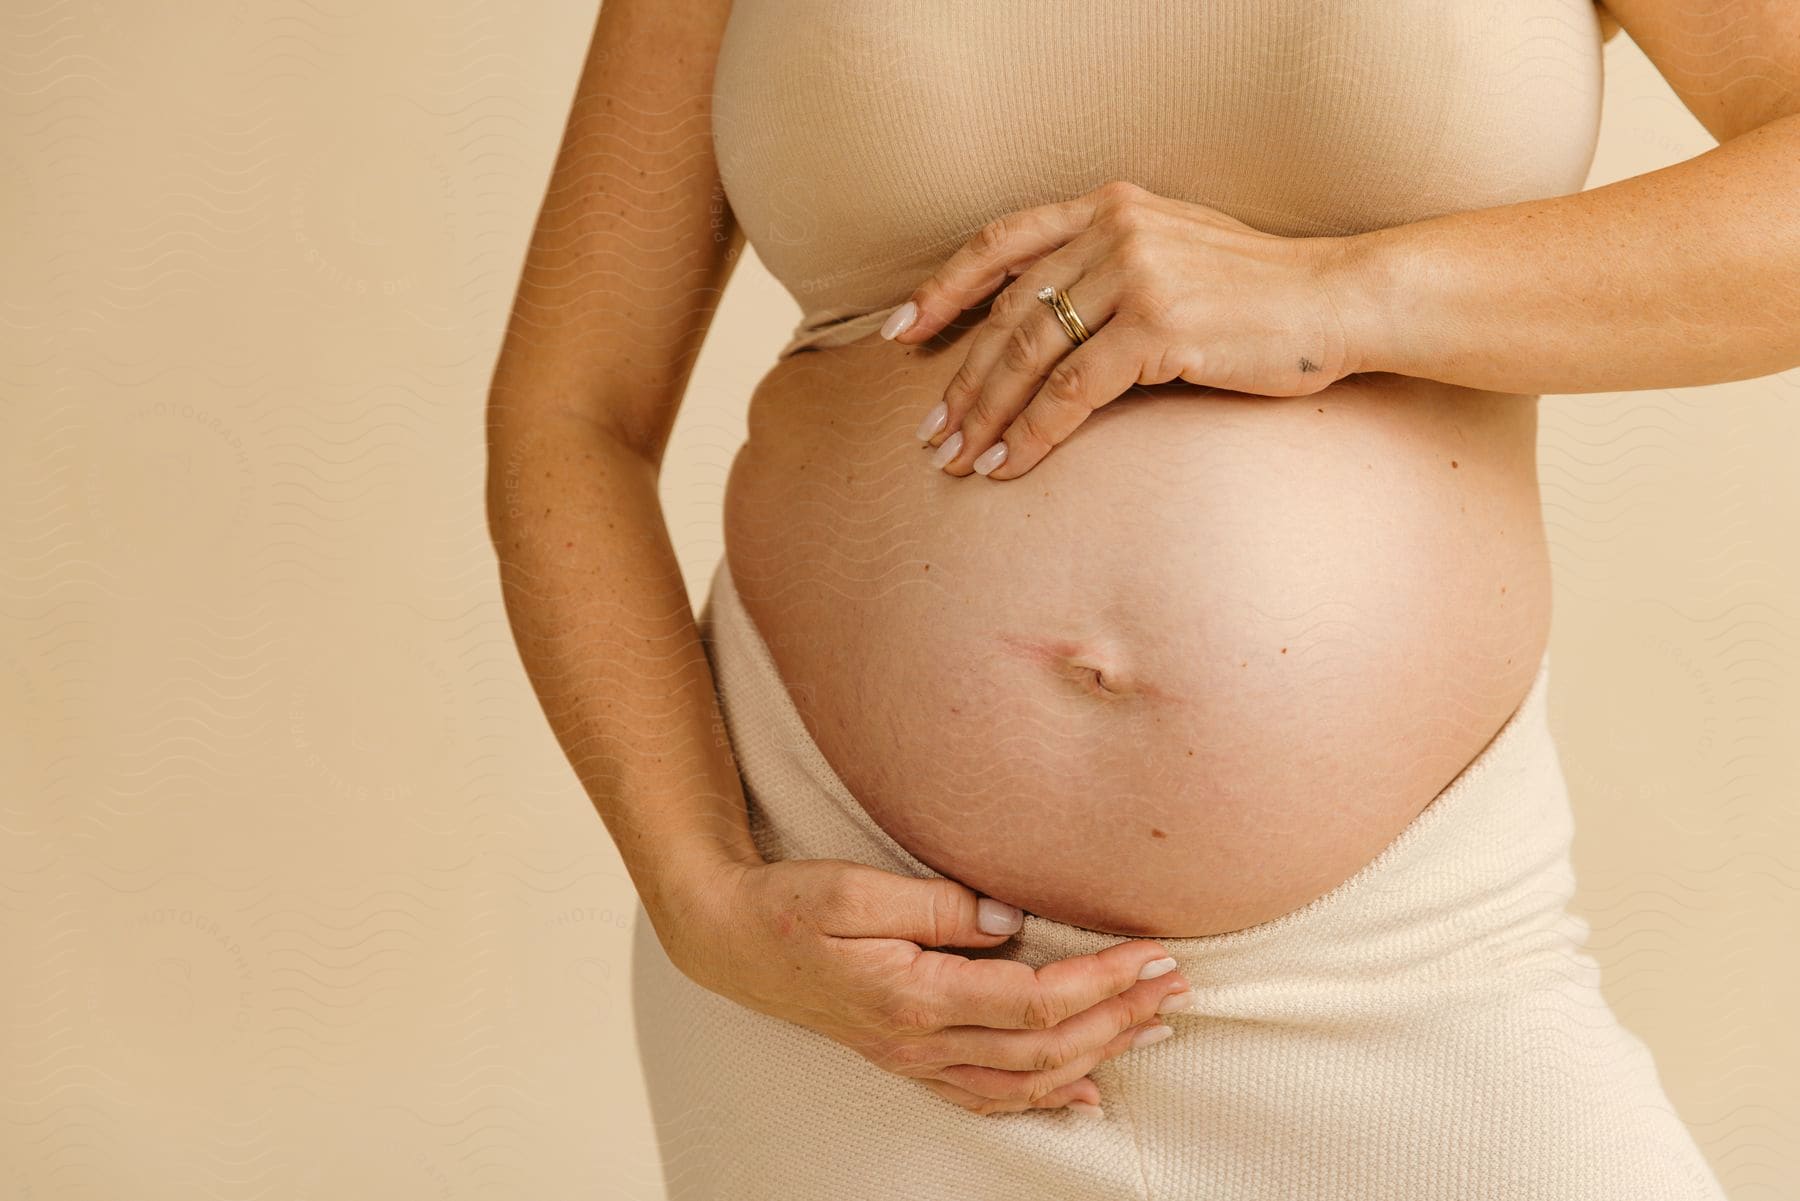 A pregnant woman holds her hands on her belly